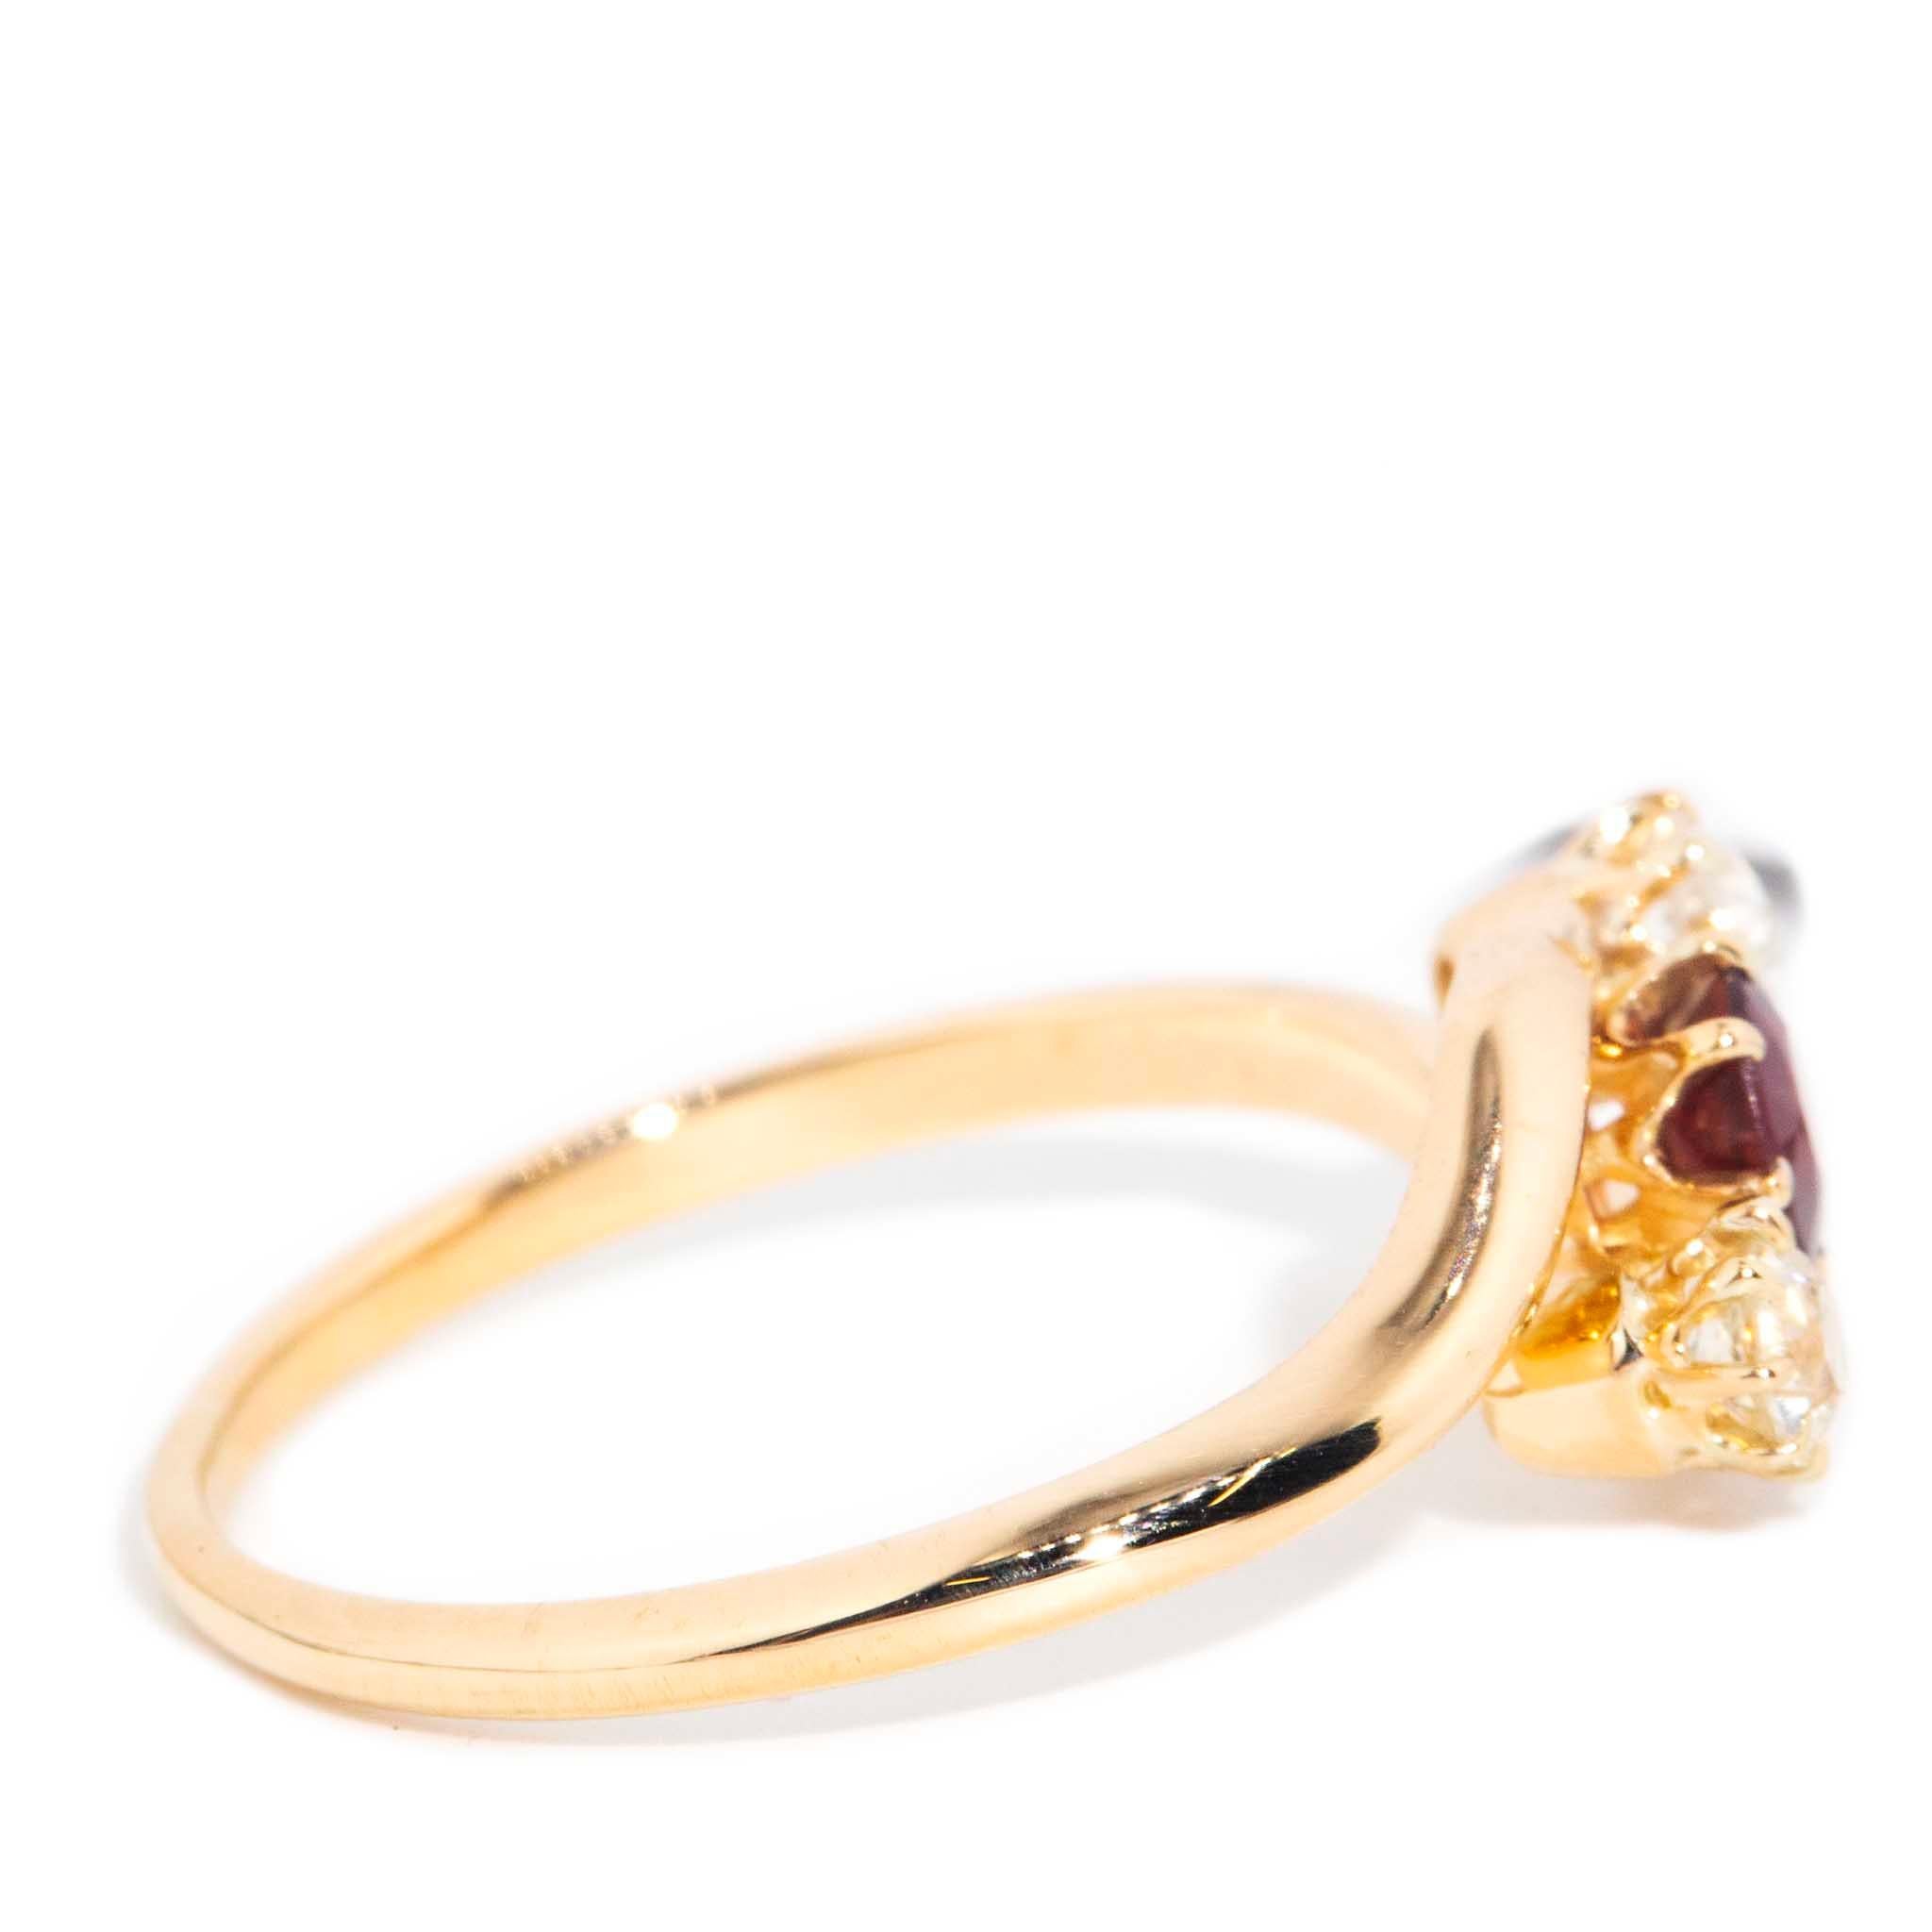 Women's Vintage Circa 1930s Garnet & Old Cut Diamond Crossover Ring 15 Carat Yellow Gold For Sale